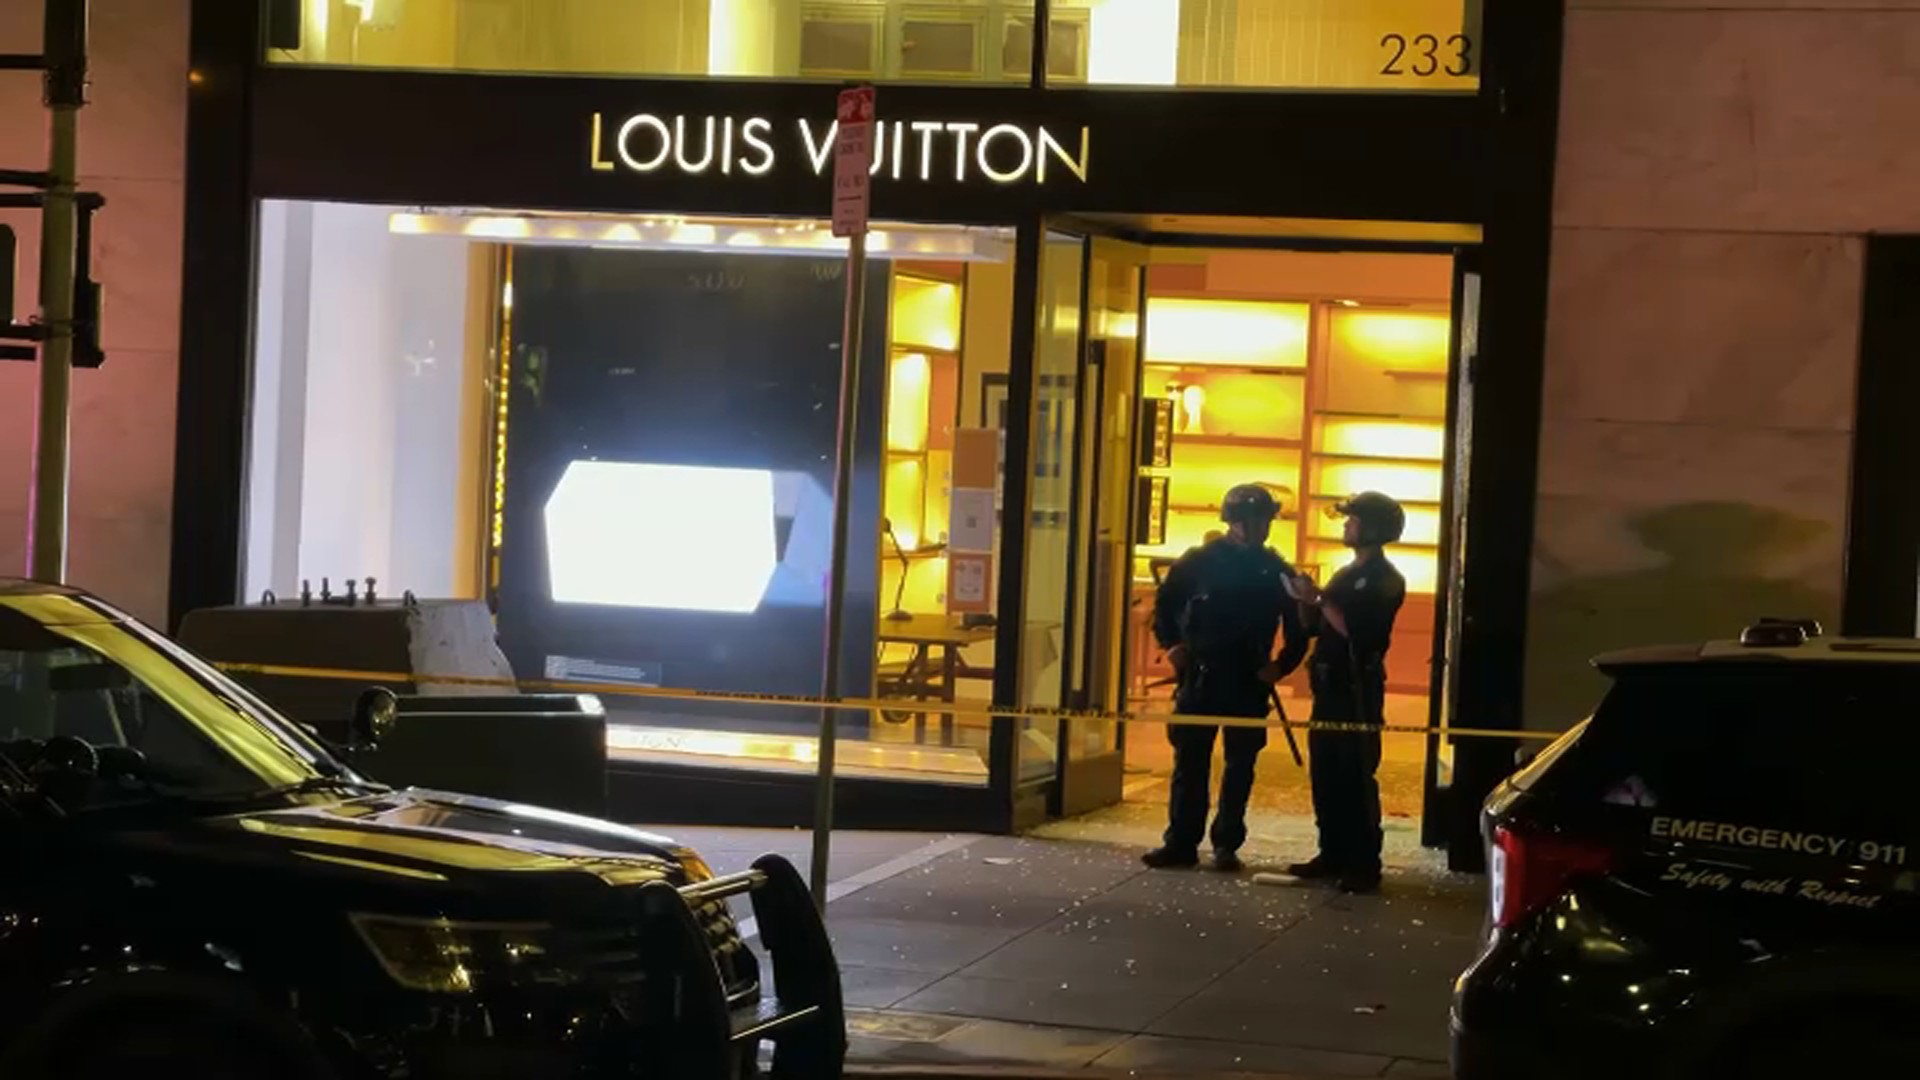 San Francisco: Luxury Stores Louis Vuitton, Nordstrom & Others Hit By  Smash-And-Grab Robbery Three Days In A Row